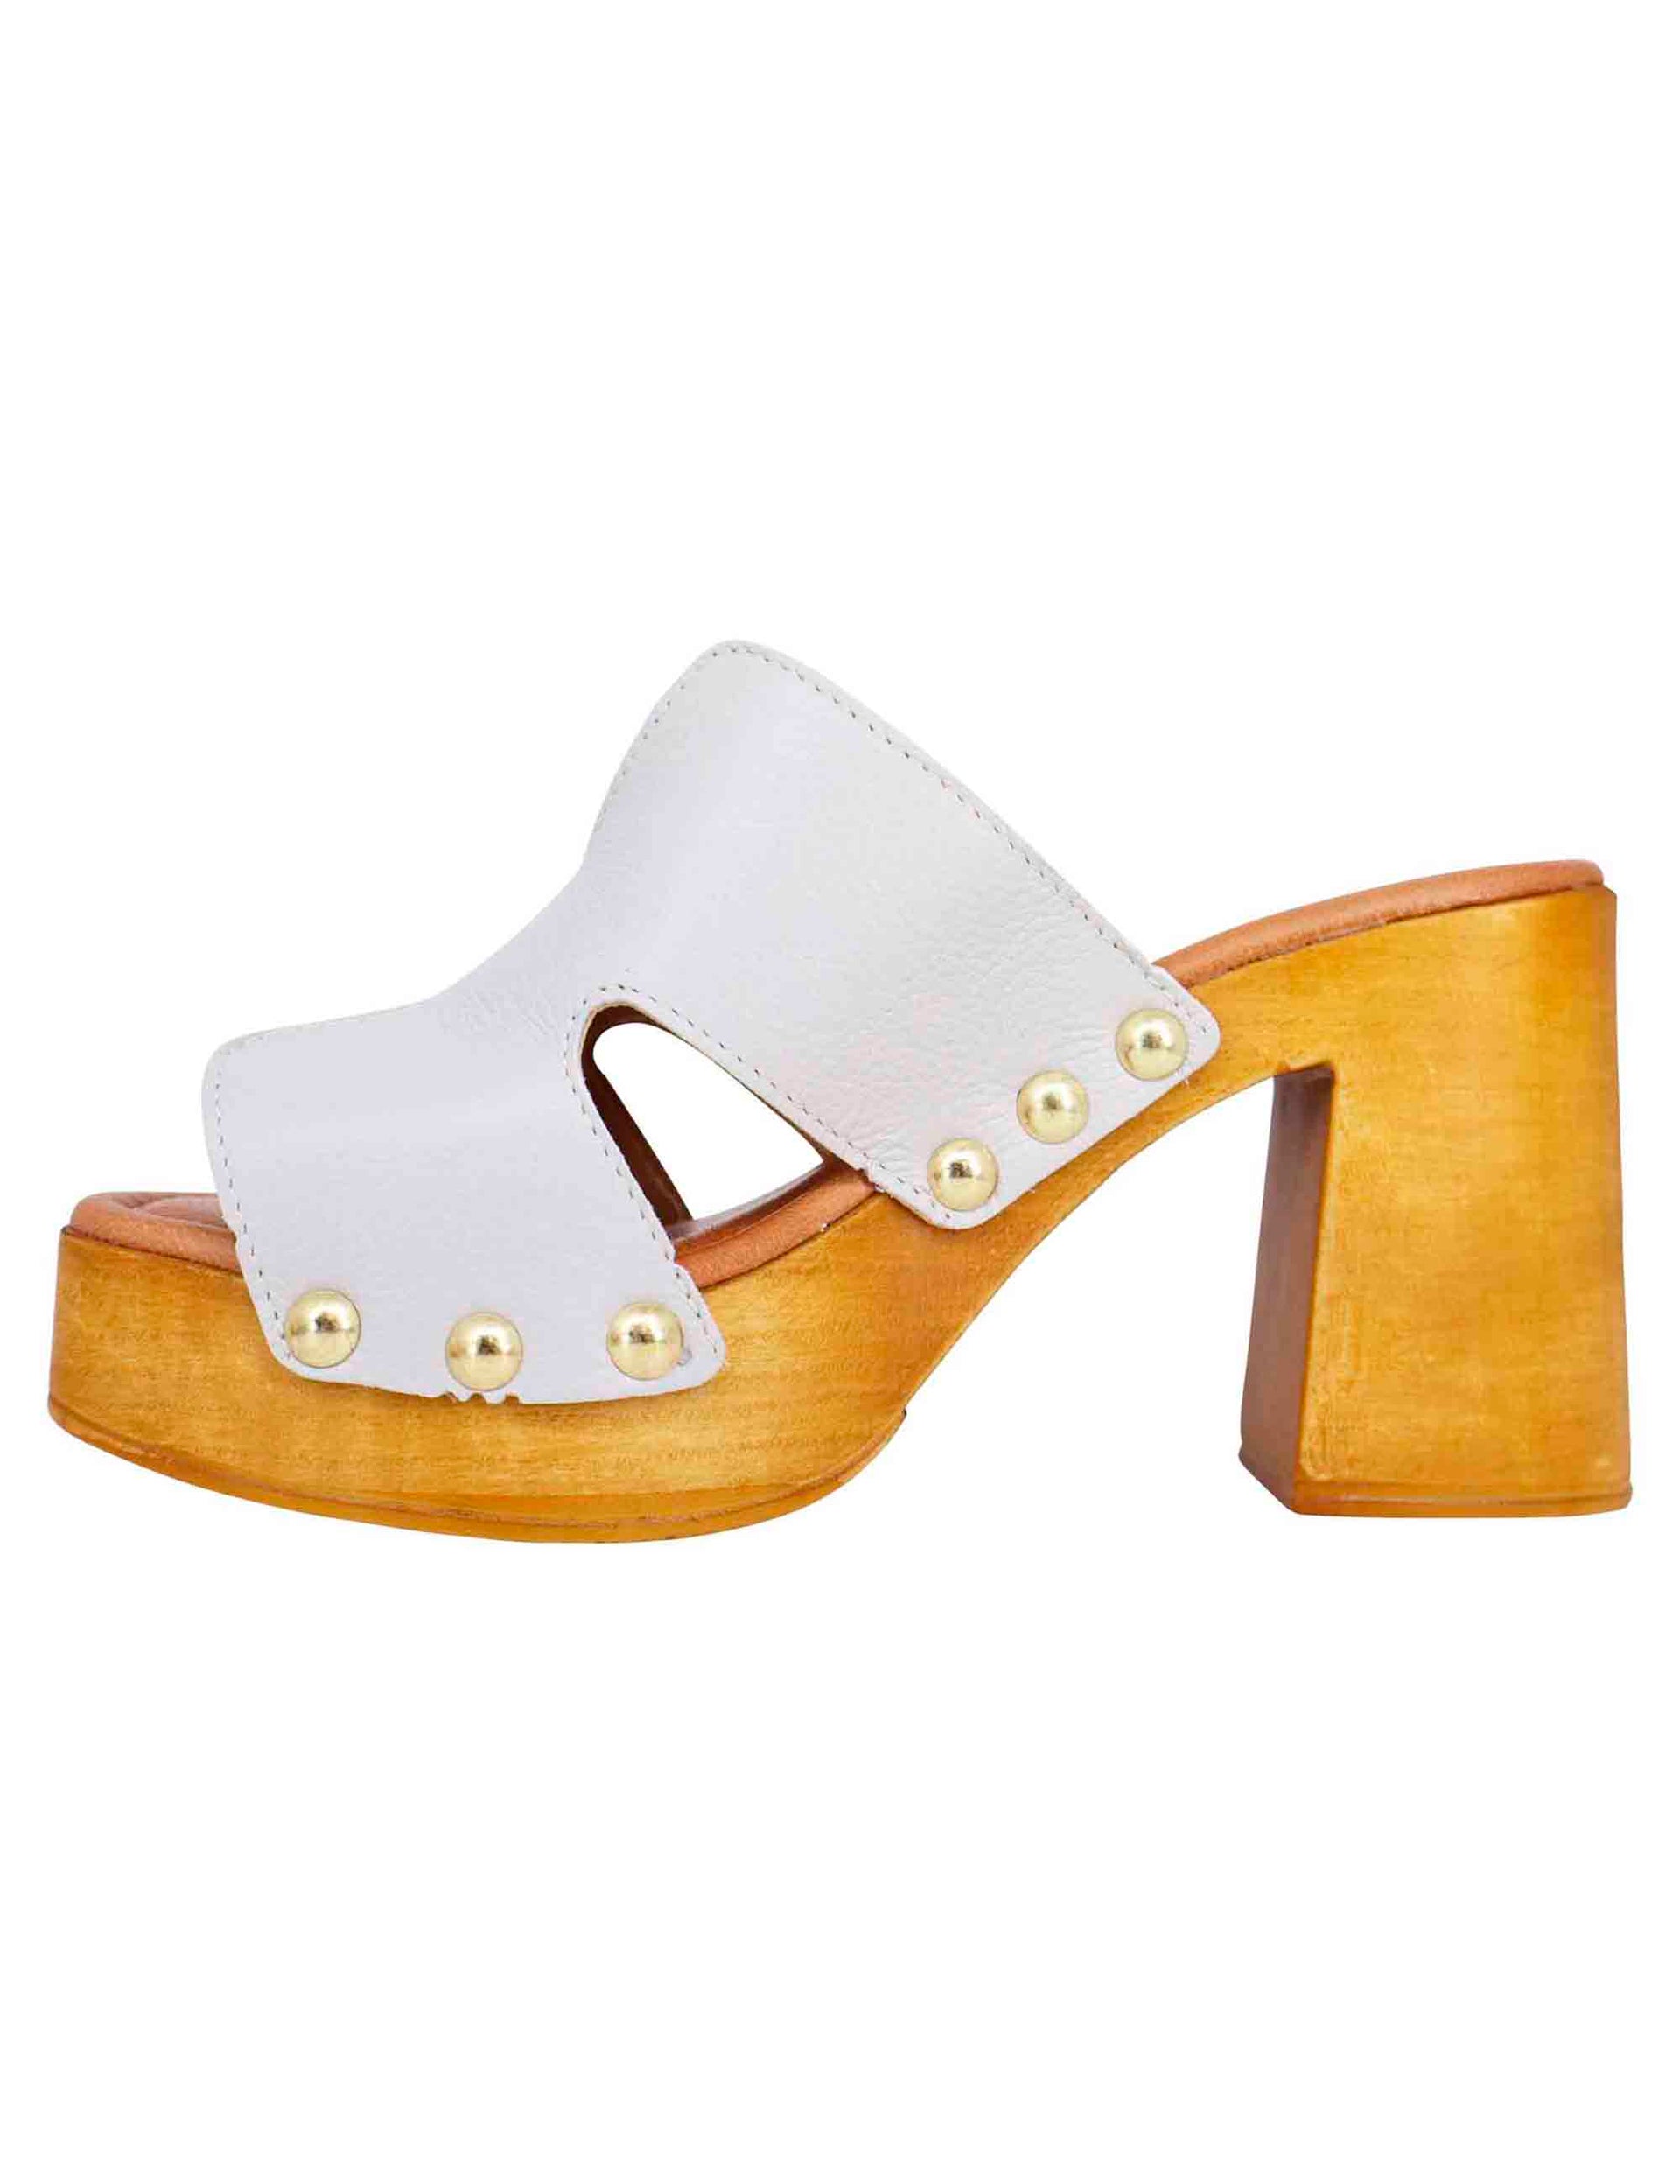 Women's clog sandals in white leather with gold buckles and high heel